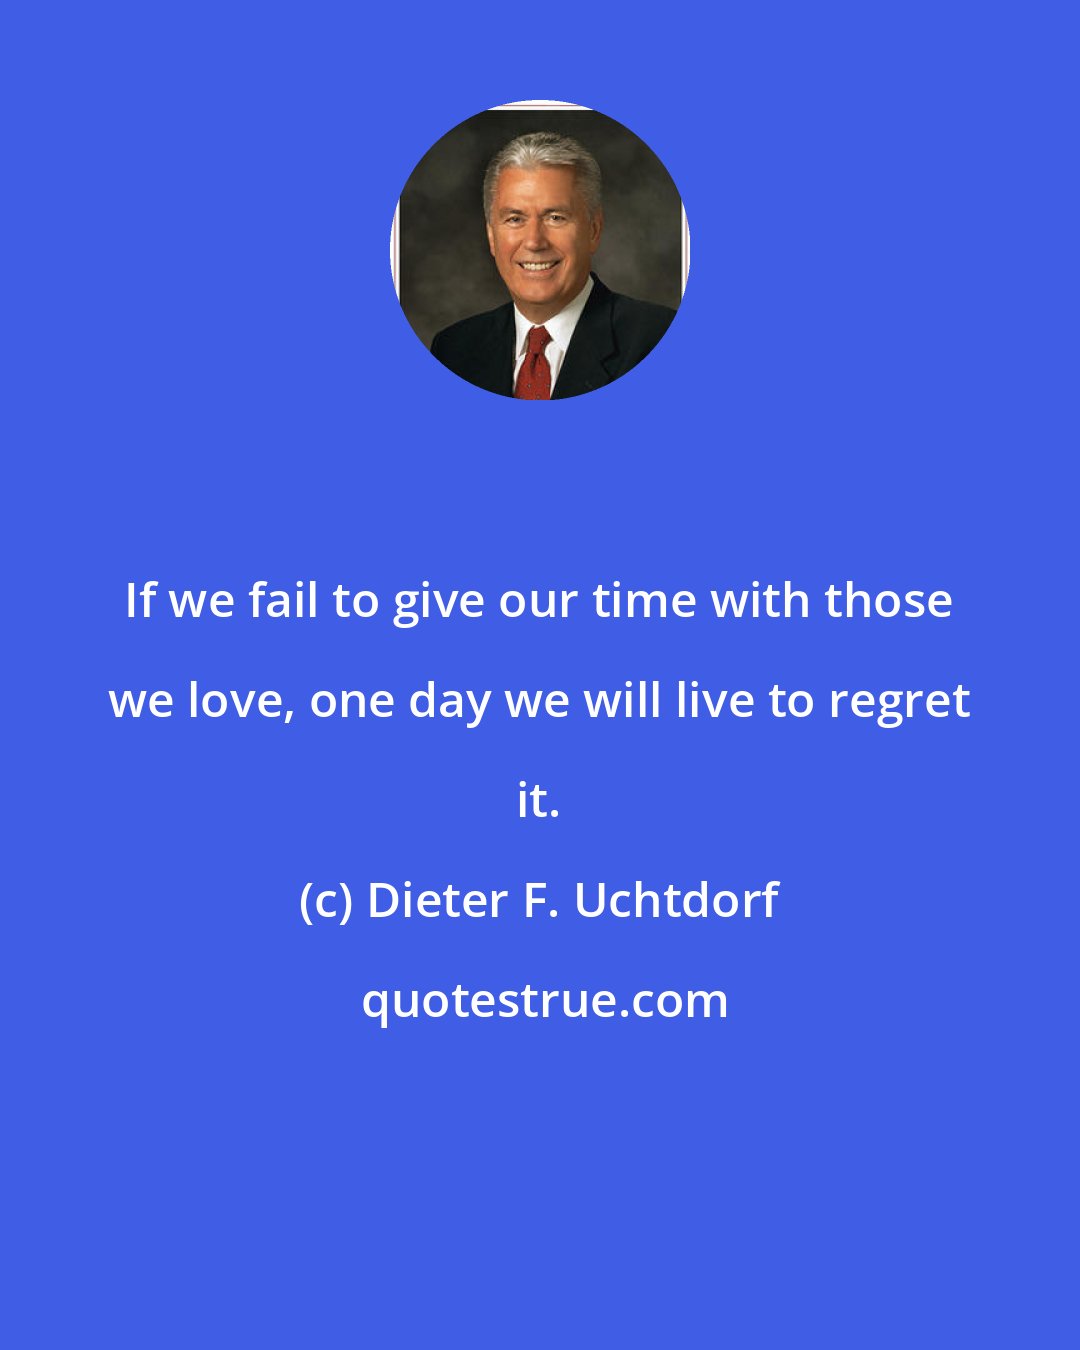 Dieter F. Uchtdorf: If we fail to give our time with those we love, one day we will live to regret it.